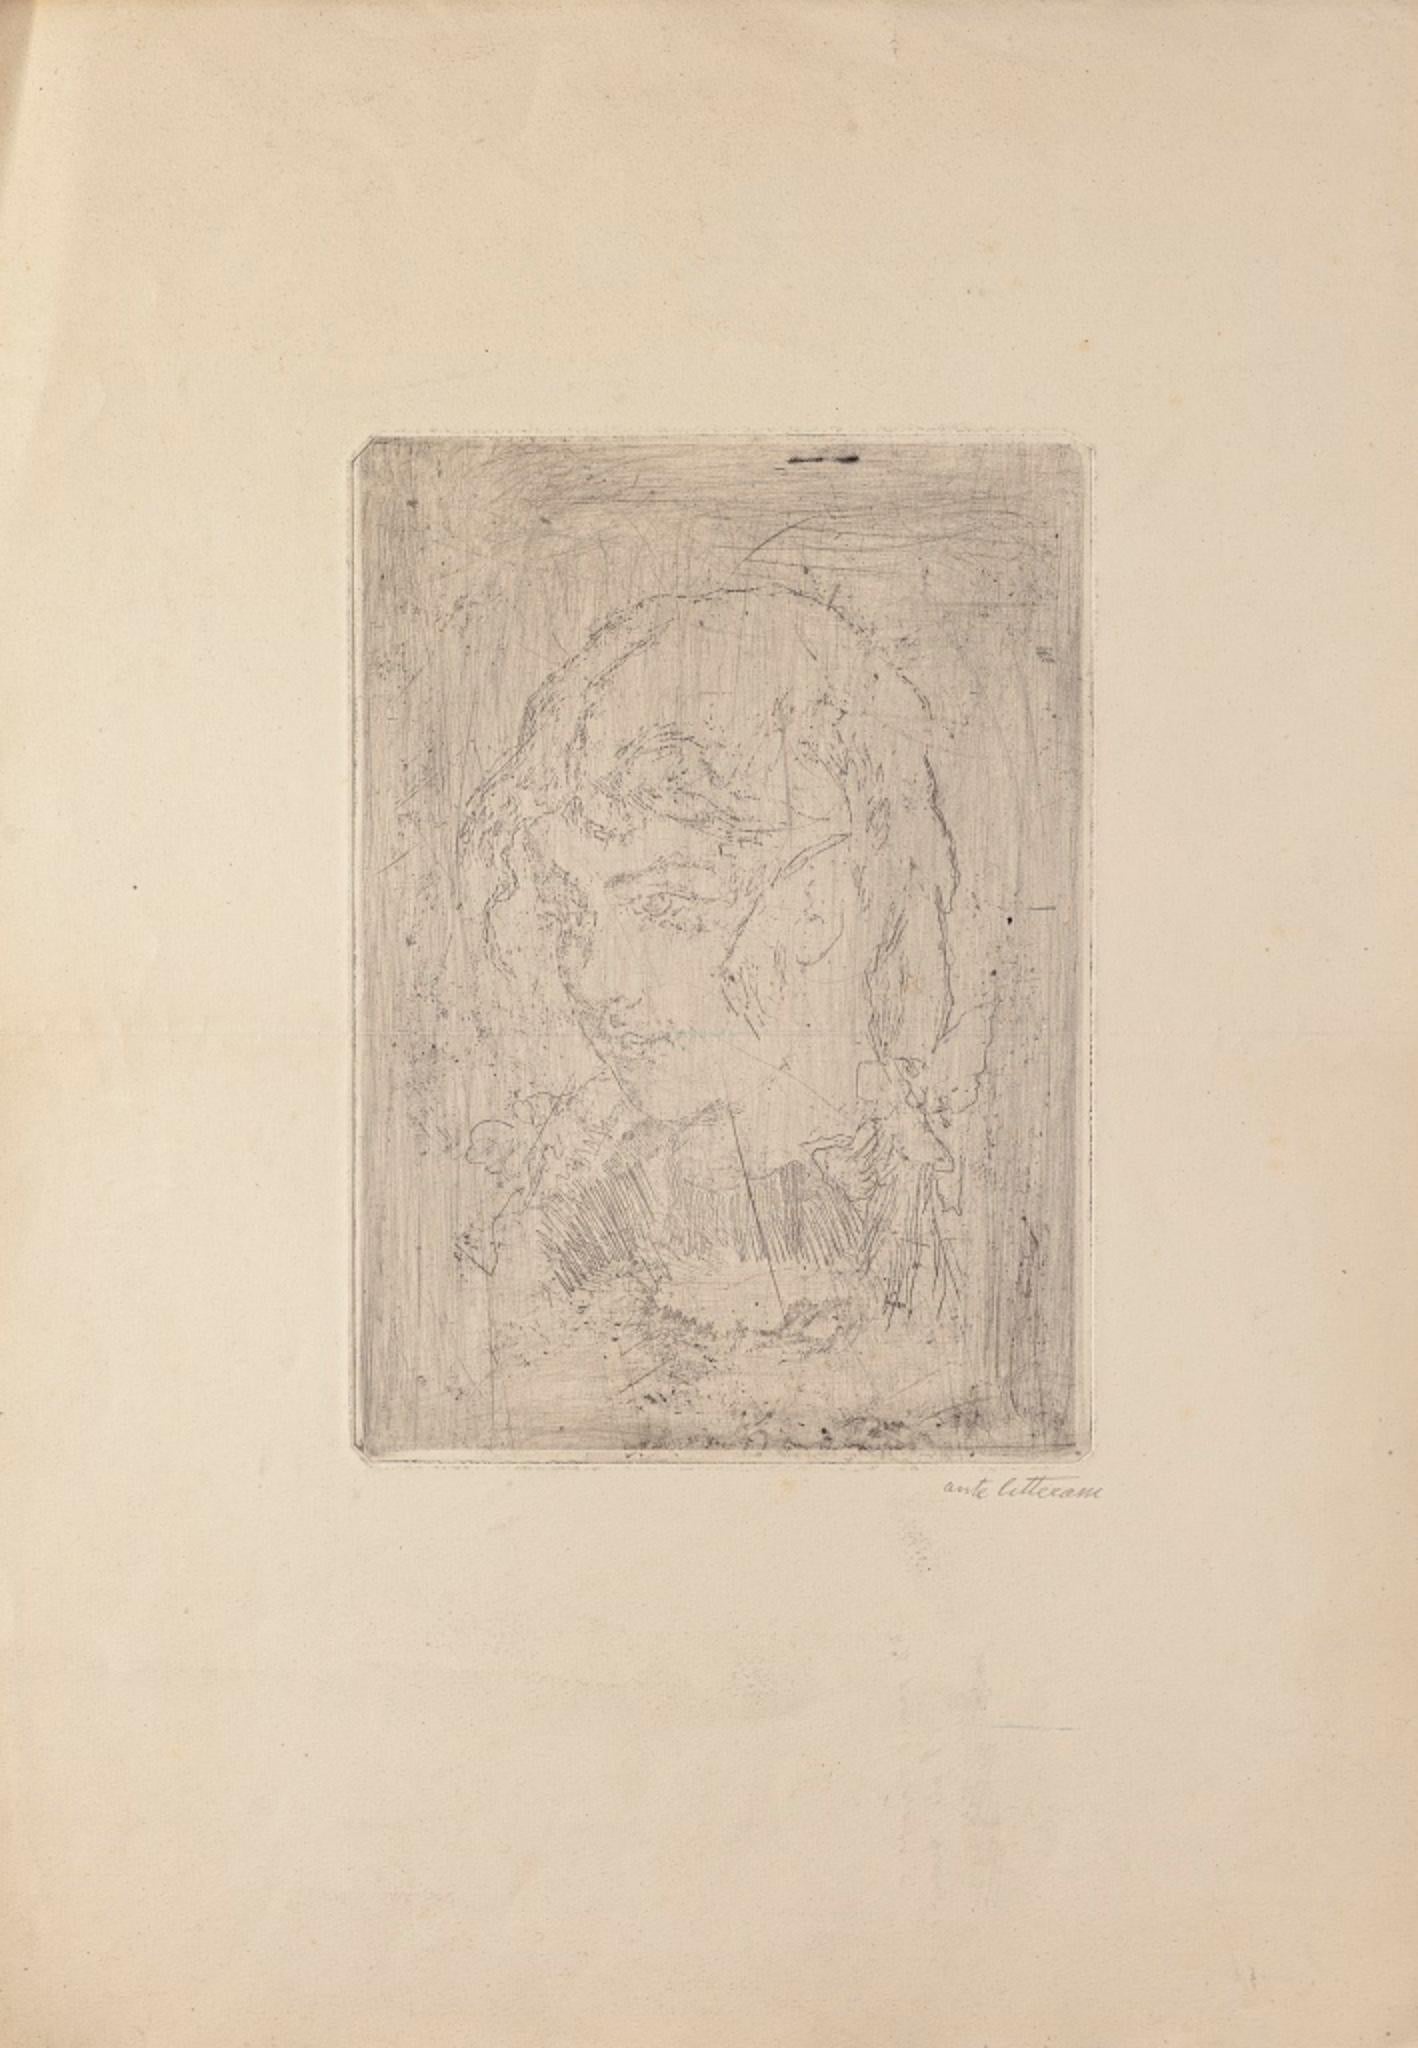 Female Portrait is an original artwork realized by Mino Maccari.

The sheet is in good conditions, except for some worn paper on the lower margin. Image Dimensions: 24.5x17.5 cm.

Mino Maccari was an Italian writer, painter, engraver and journalist,